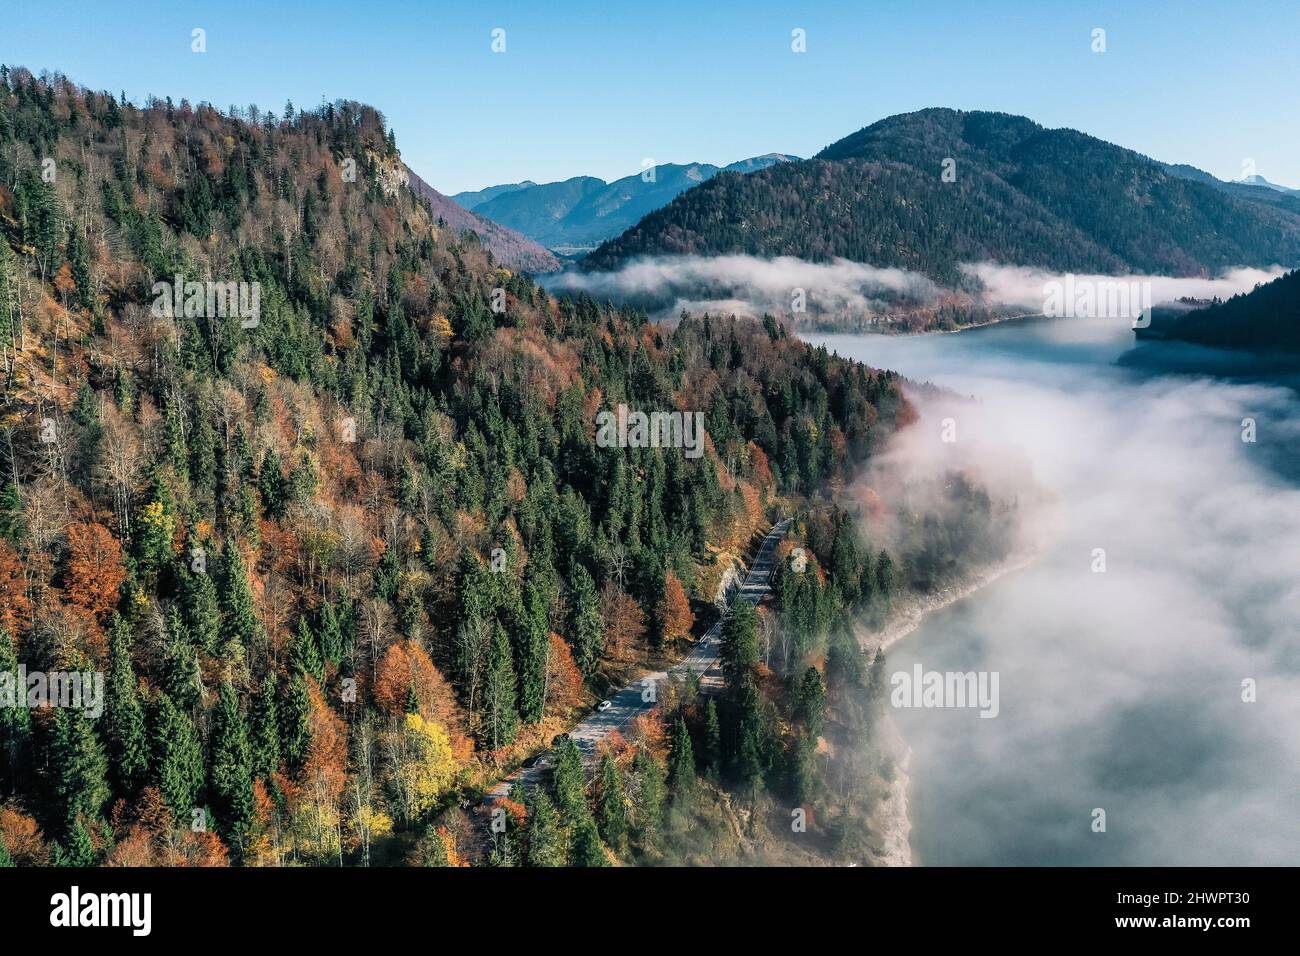 Wafts of fog over Sylvensteinsee lake, Bad Tolz, Bavaria, Germany Stock Photo